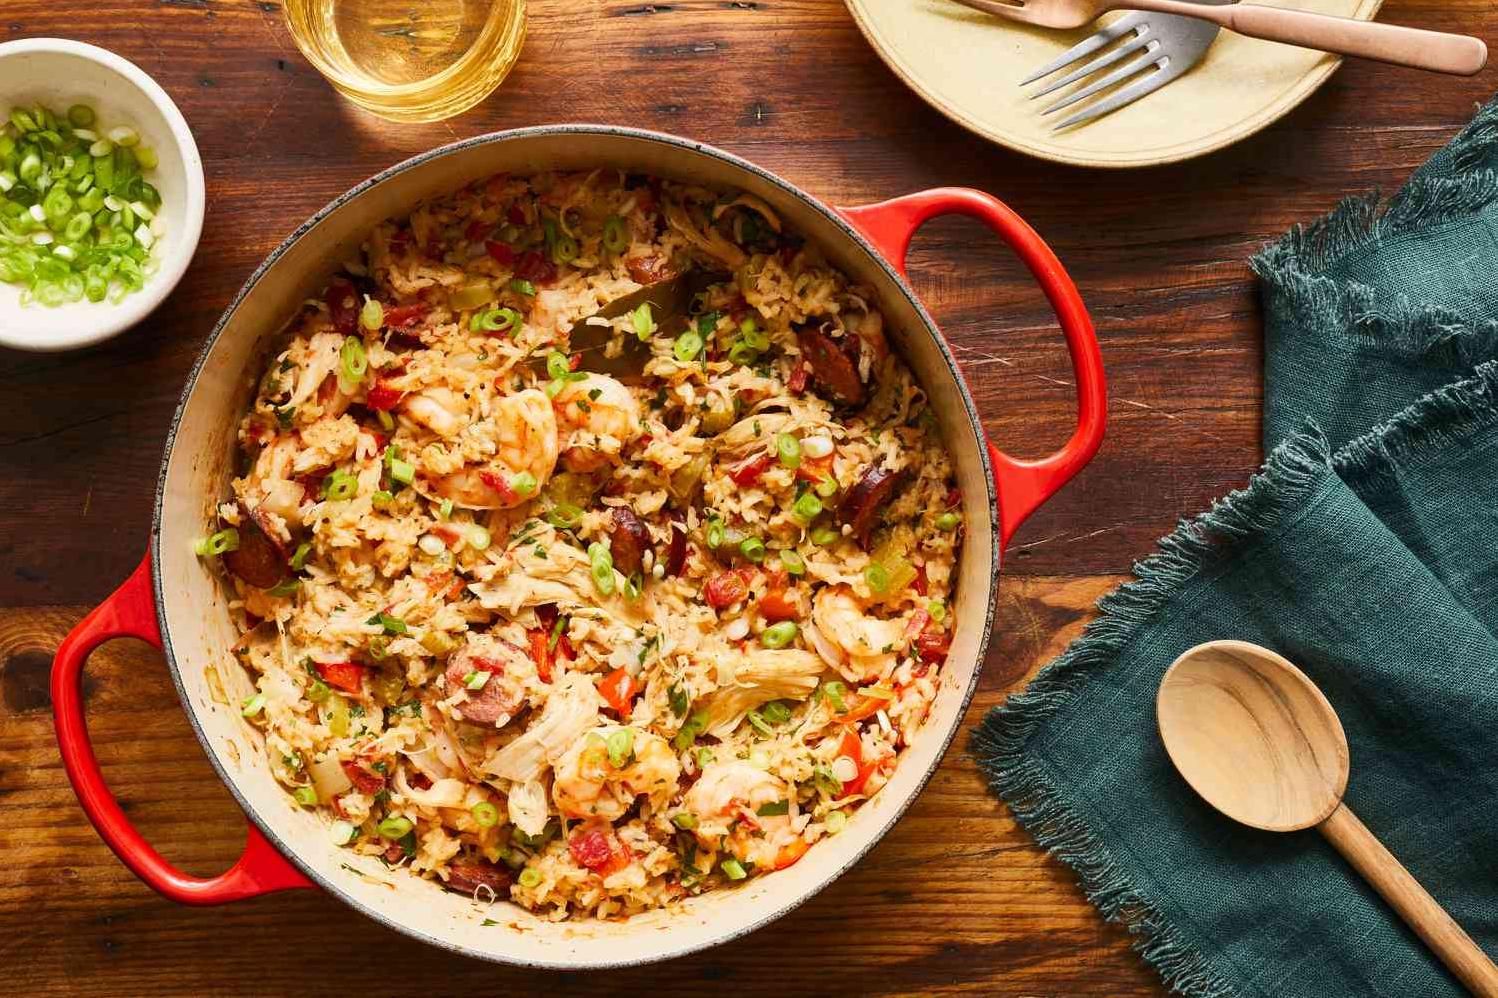  Layers of tender rice, delicious meats and veggies make this dish unforgettable.